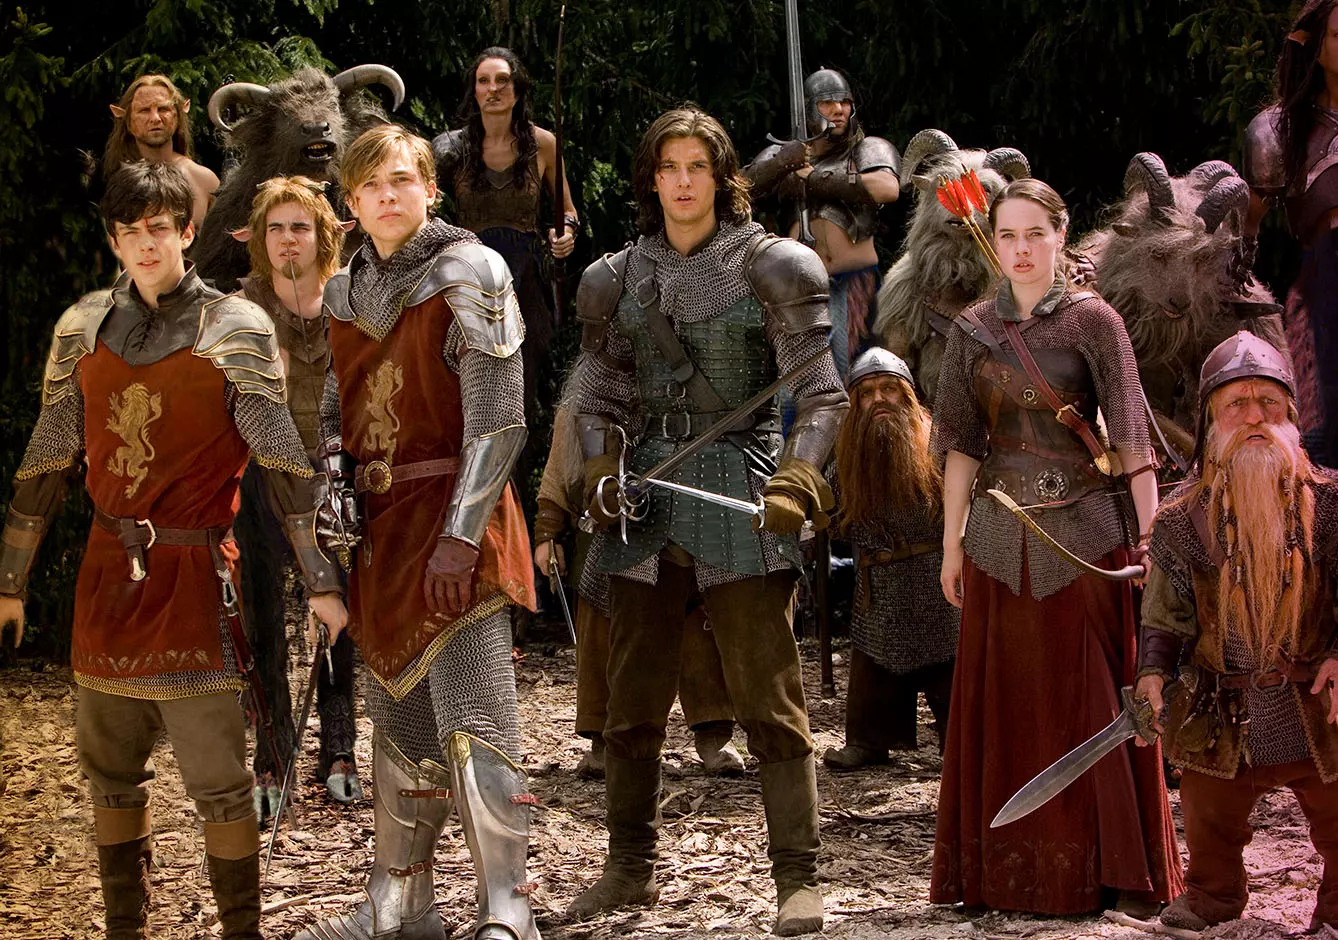 The Chronicles of Narnia Prince Caspian